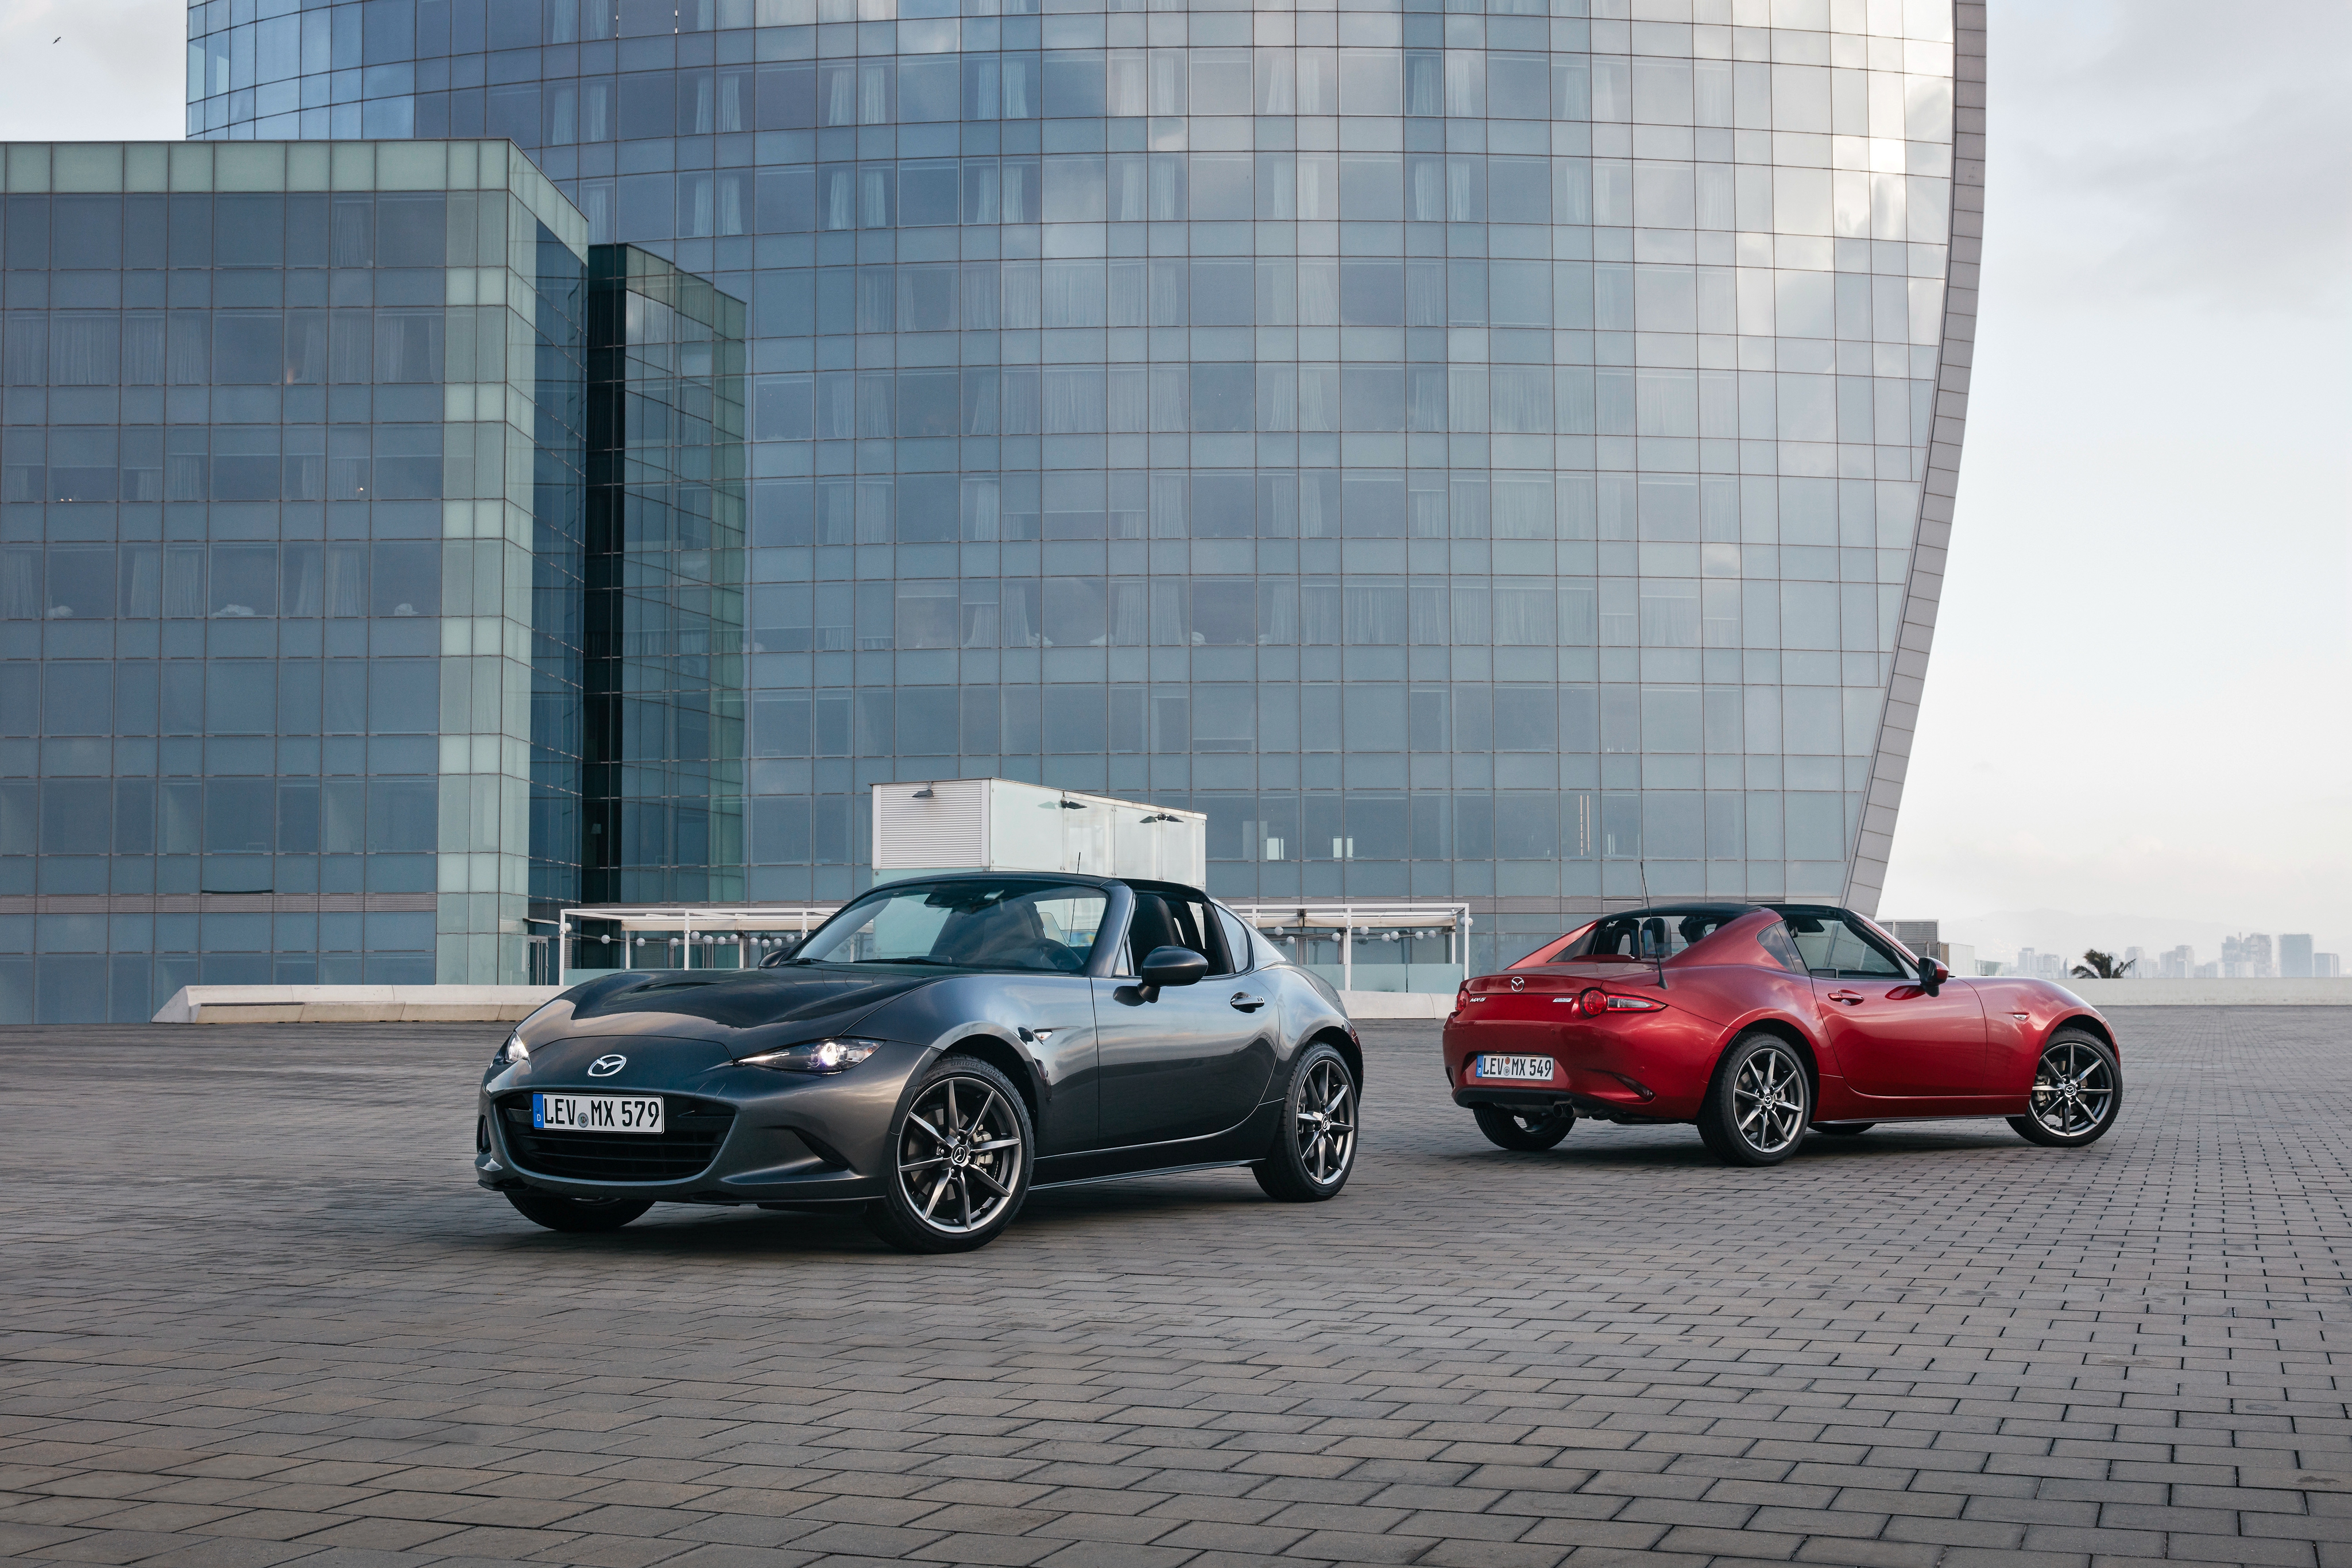  Mazda Mx 5 HQ Background Wallpapers